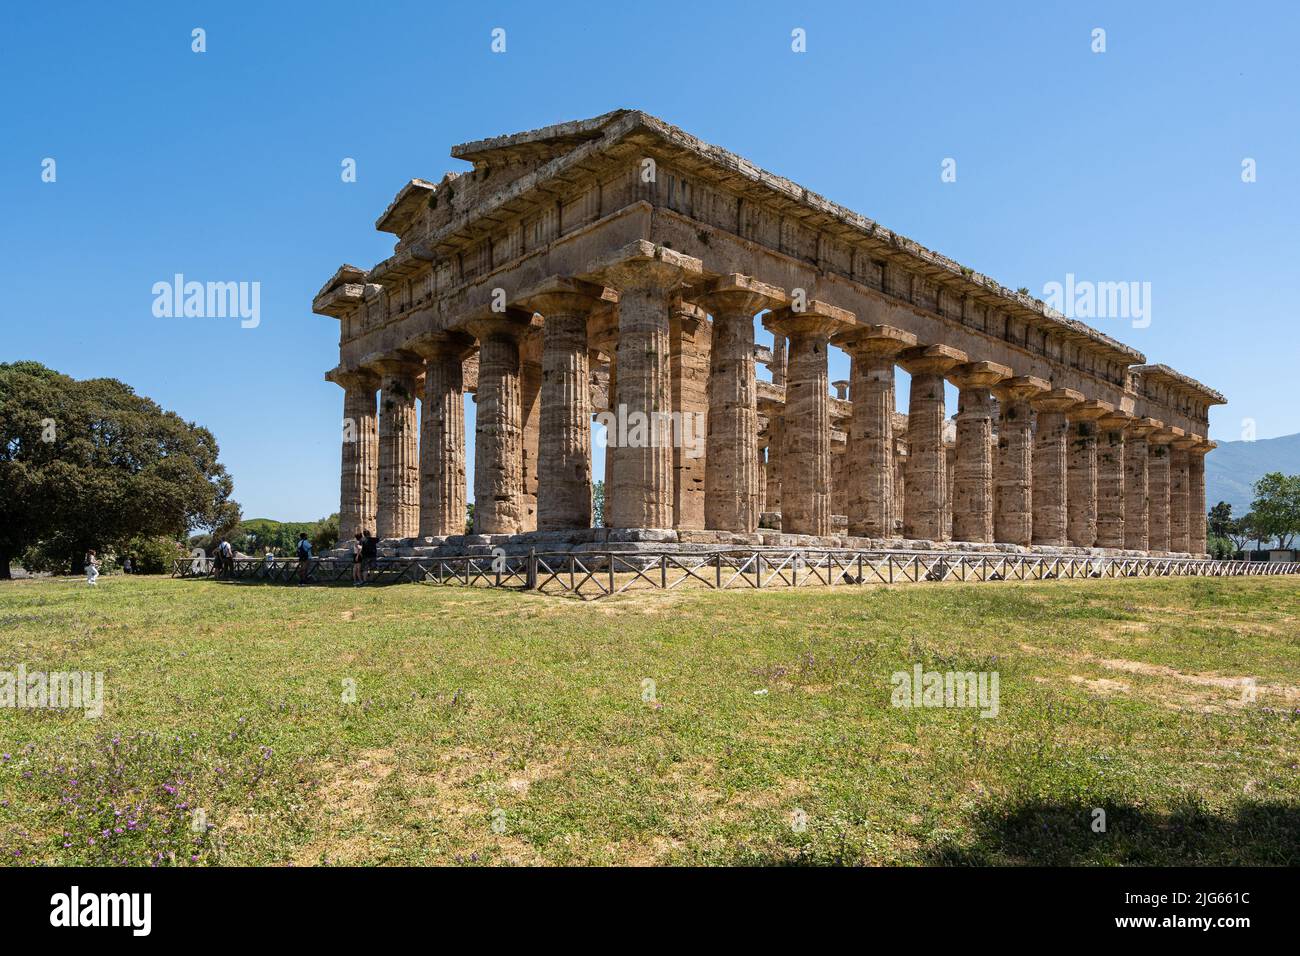 The Temple of Hera at Paestum, anche example of Doric order temple dating from about 550 to 450 BC, Campania, Italy Stock Photo